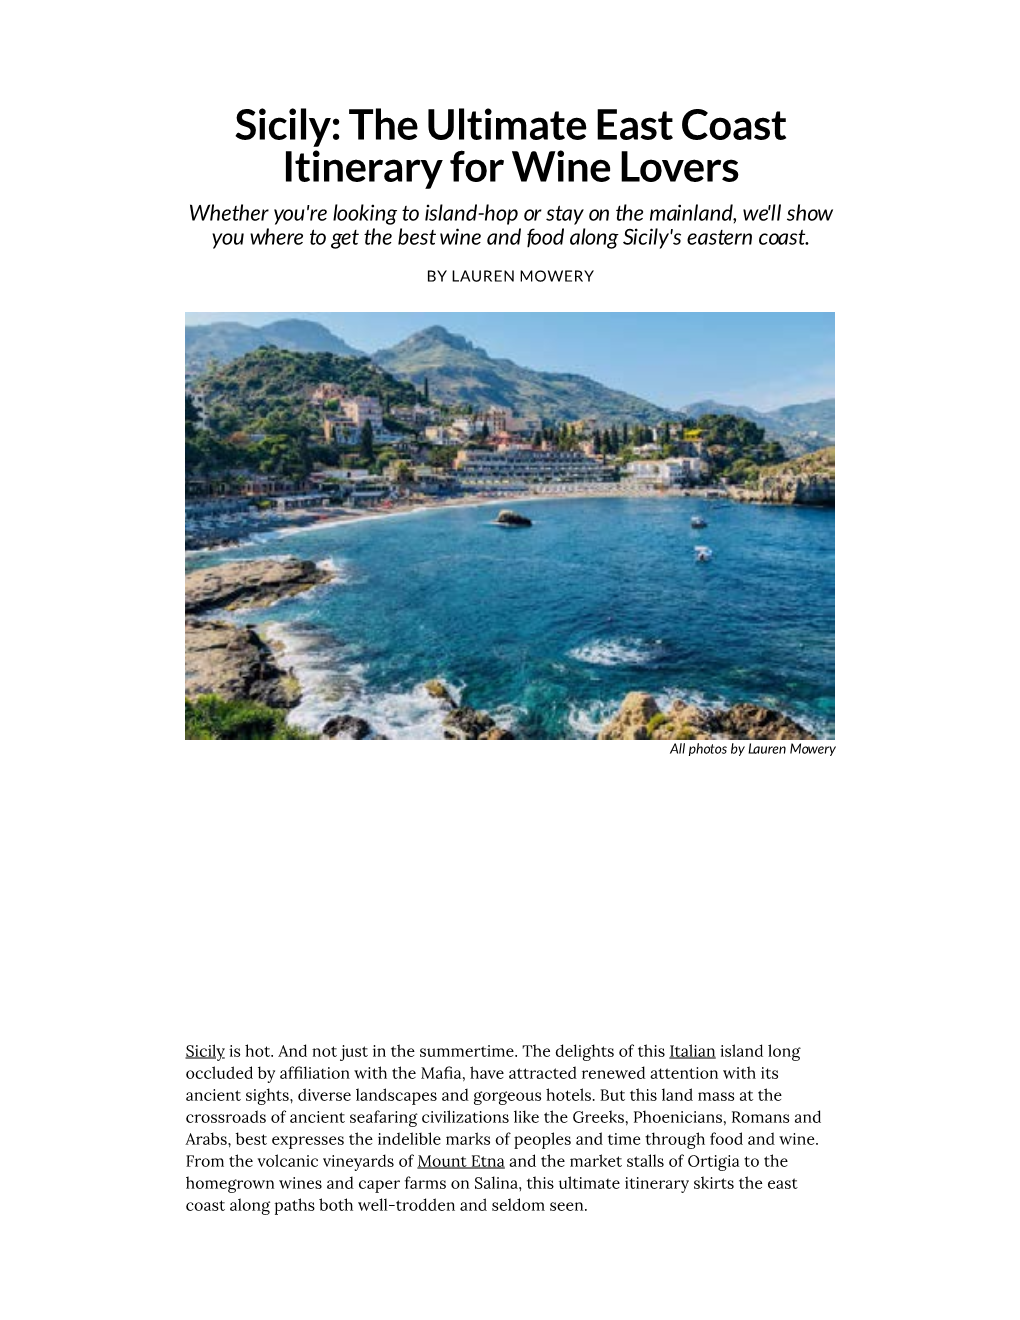 Sicily: the Ultimate East Coast Itinerary for Wine Lovers